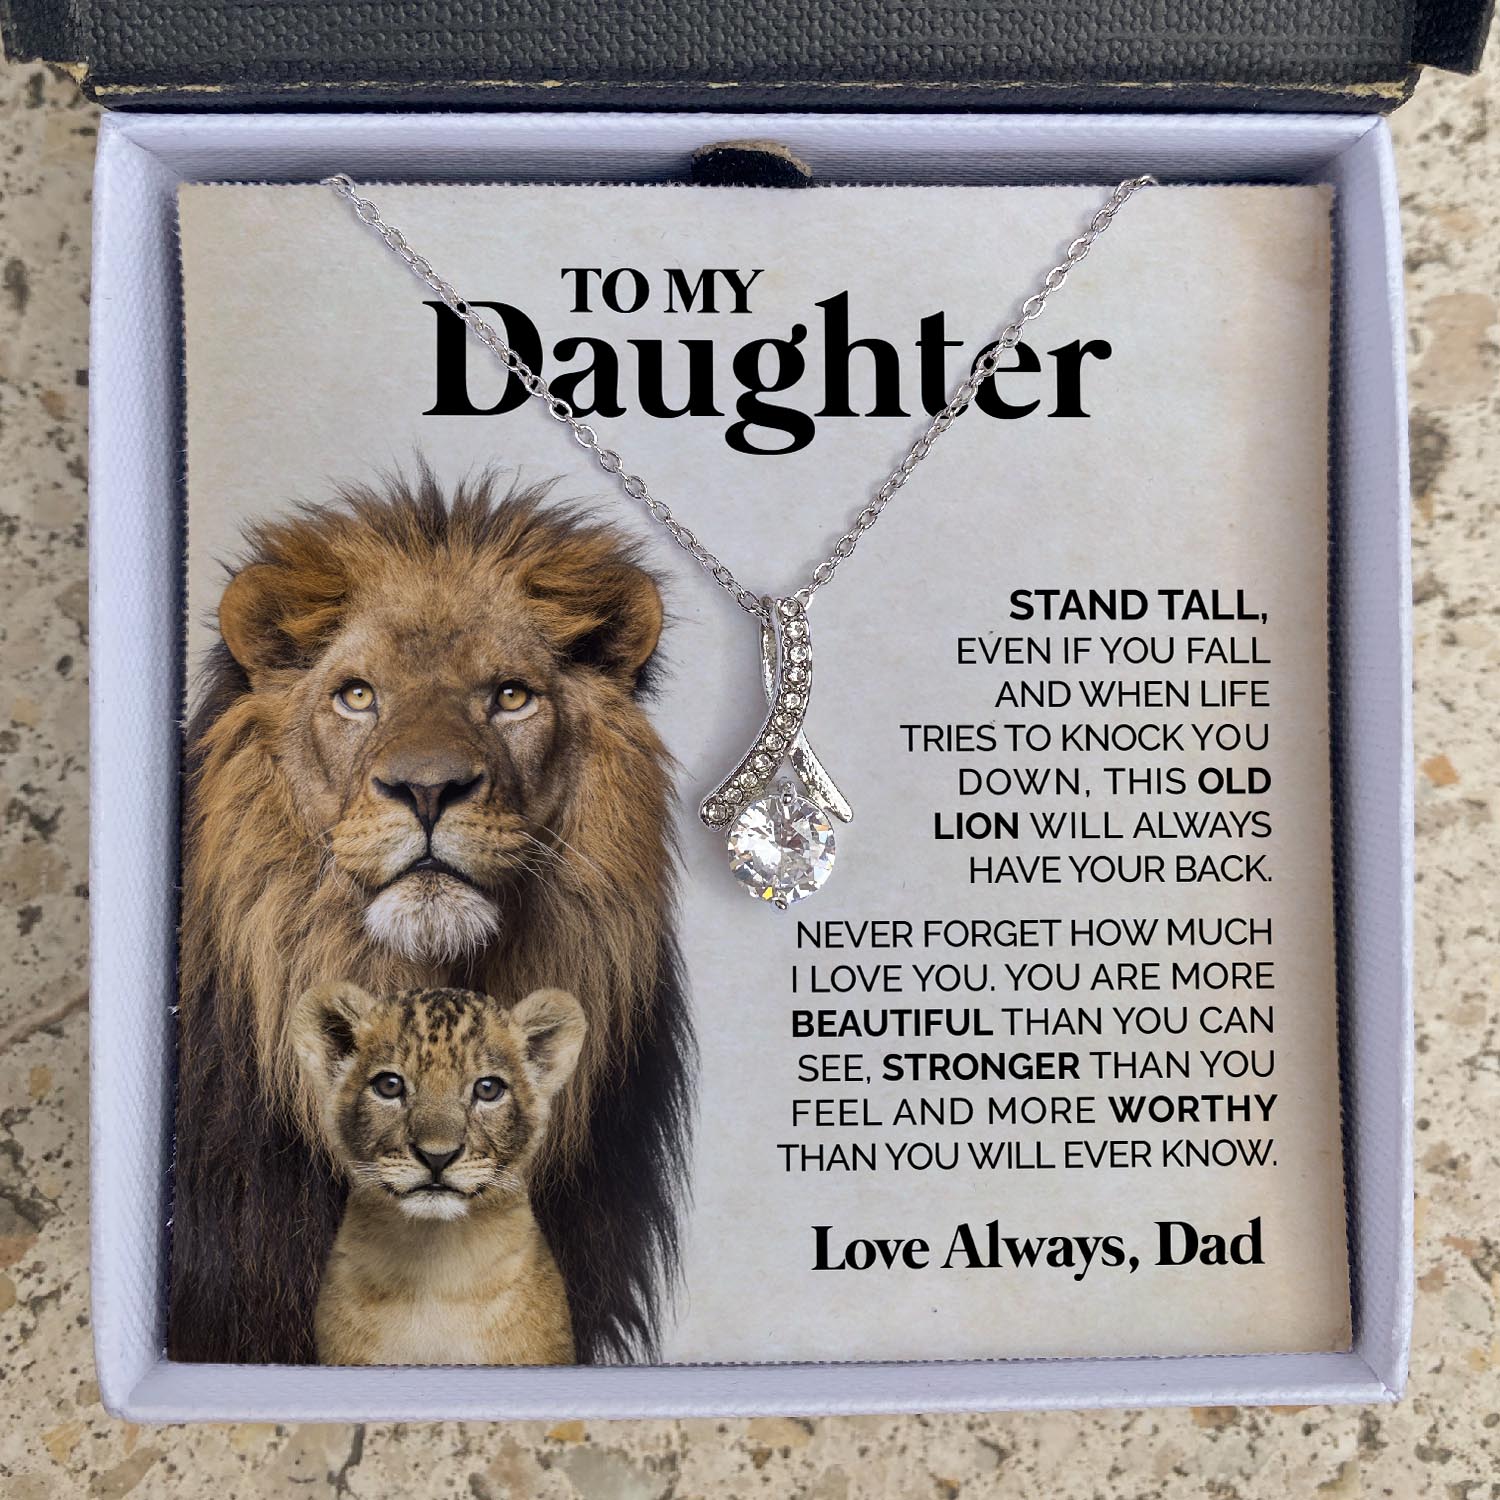 ShineOn Fulfillment Jewelry 14K White Gold Finish / Two-Toned Box To my Daughter from Dad - Stand tall - Ribbon Necklace